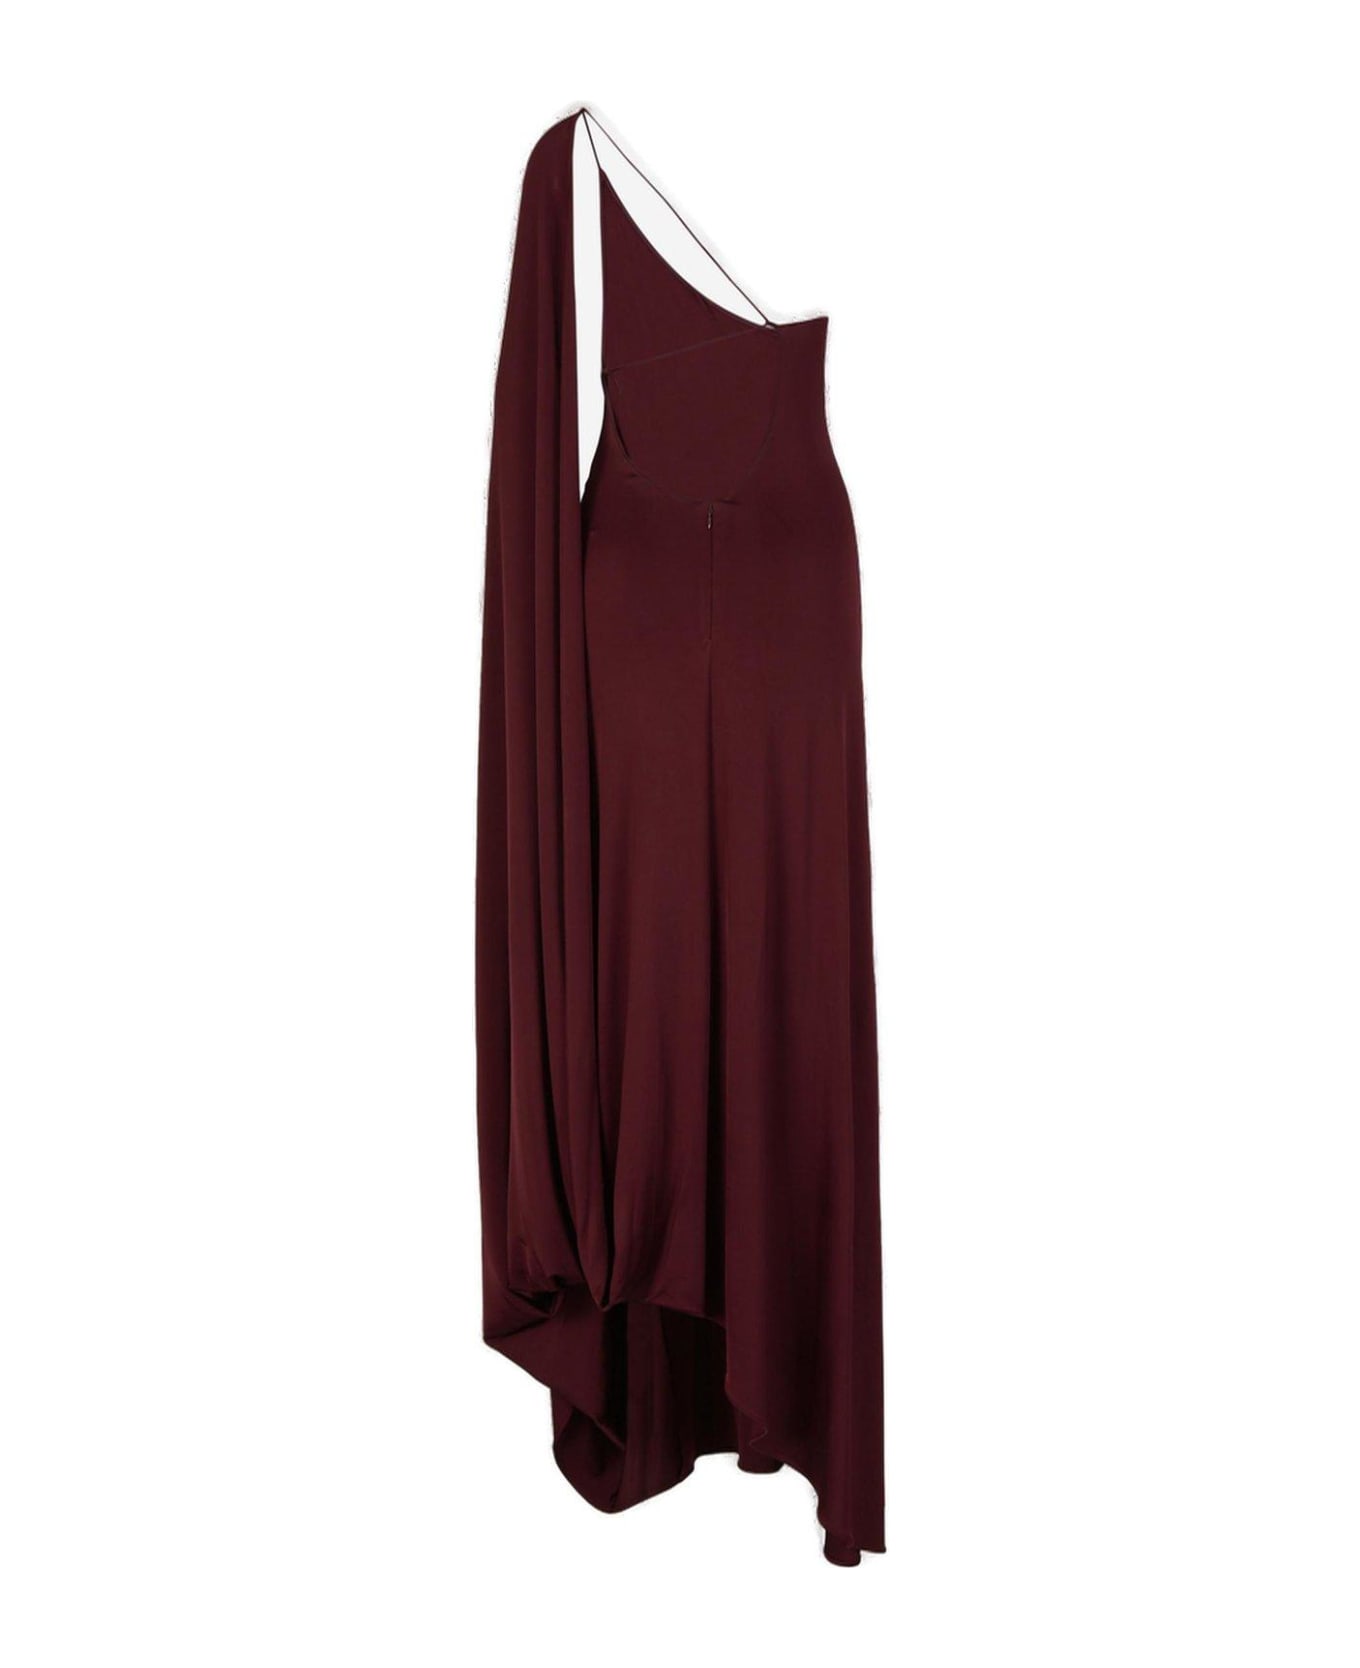 Stella McCartney One-shoulder Cape Gown - RED